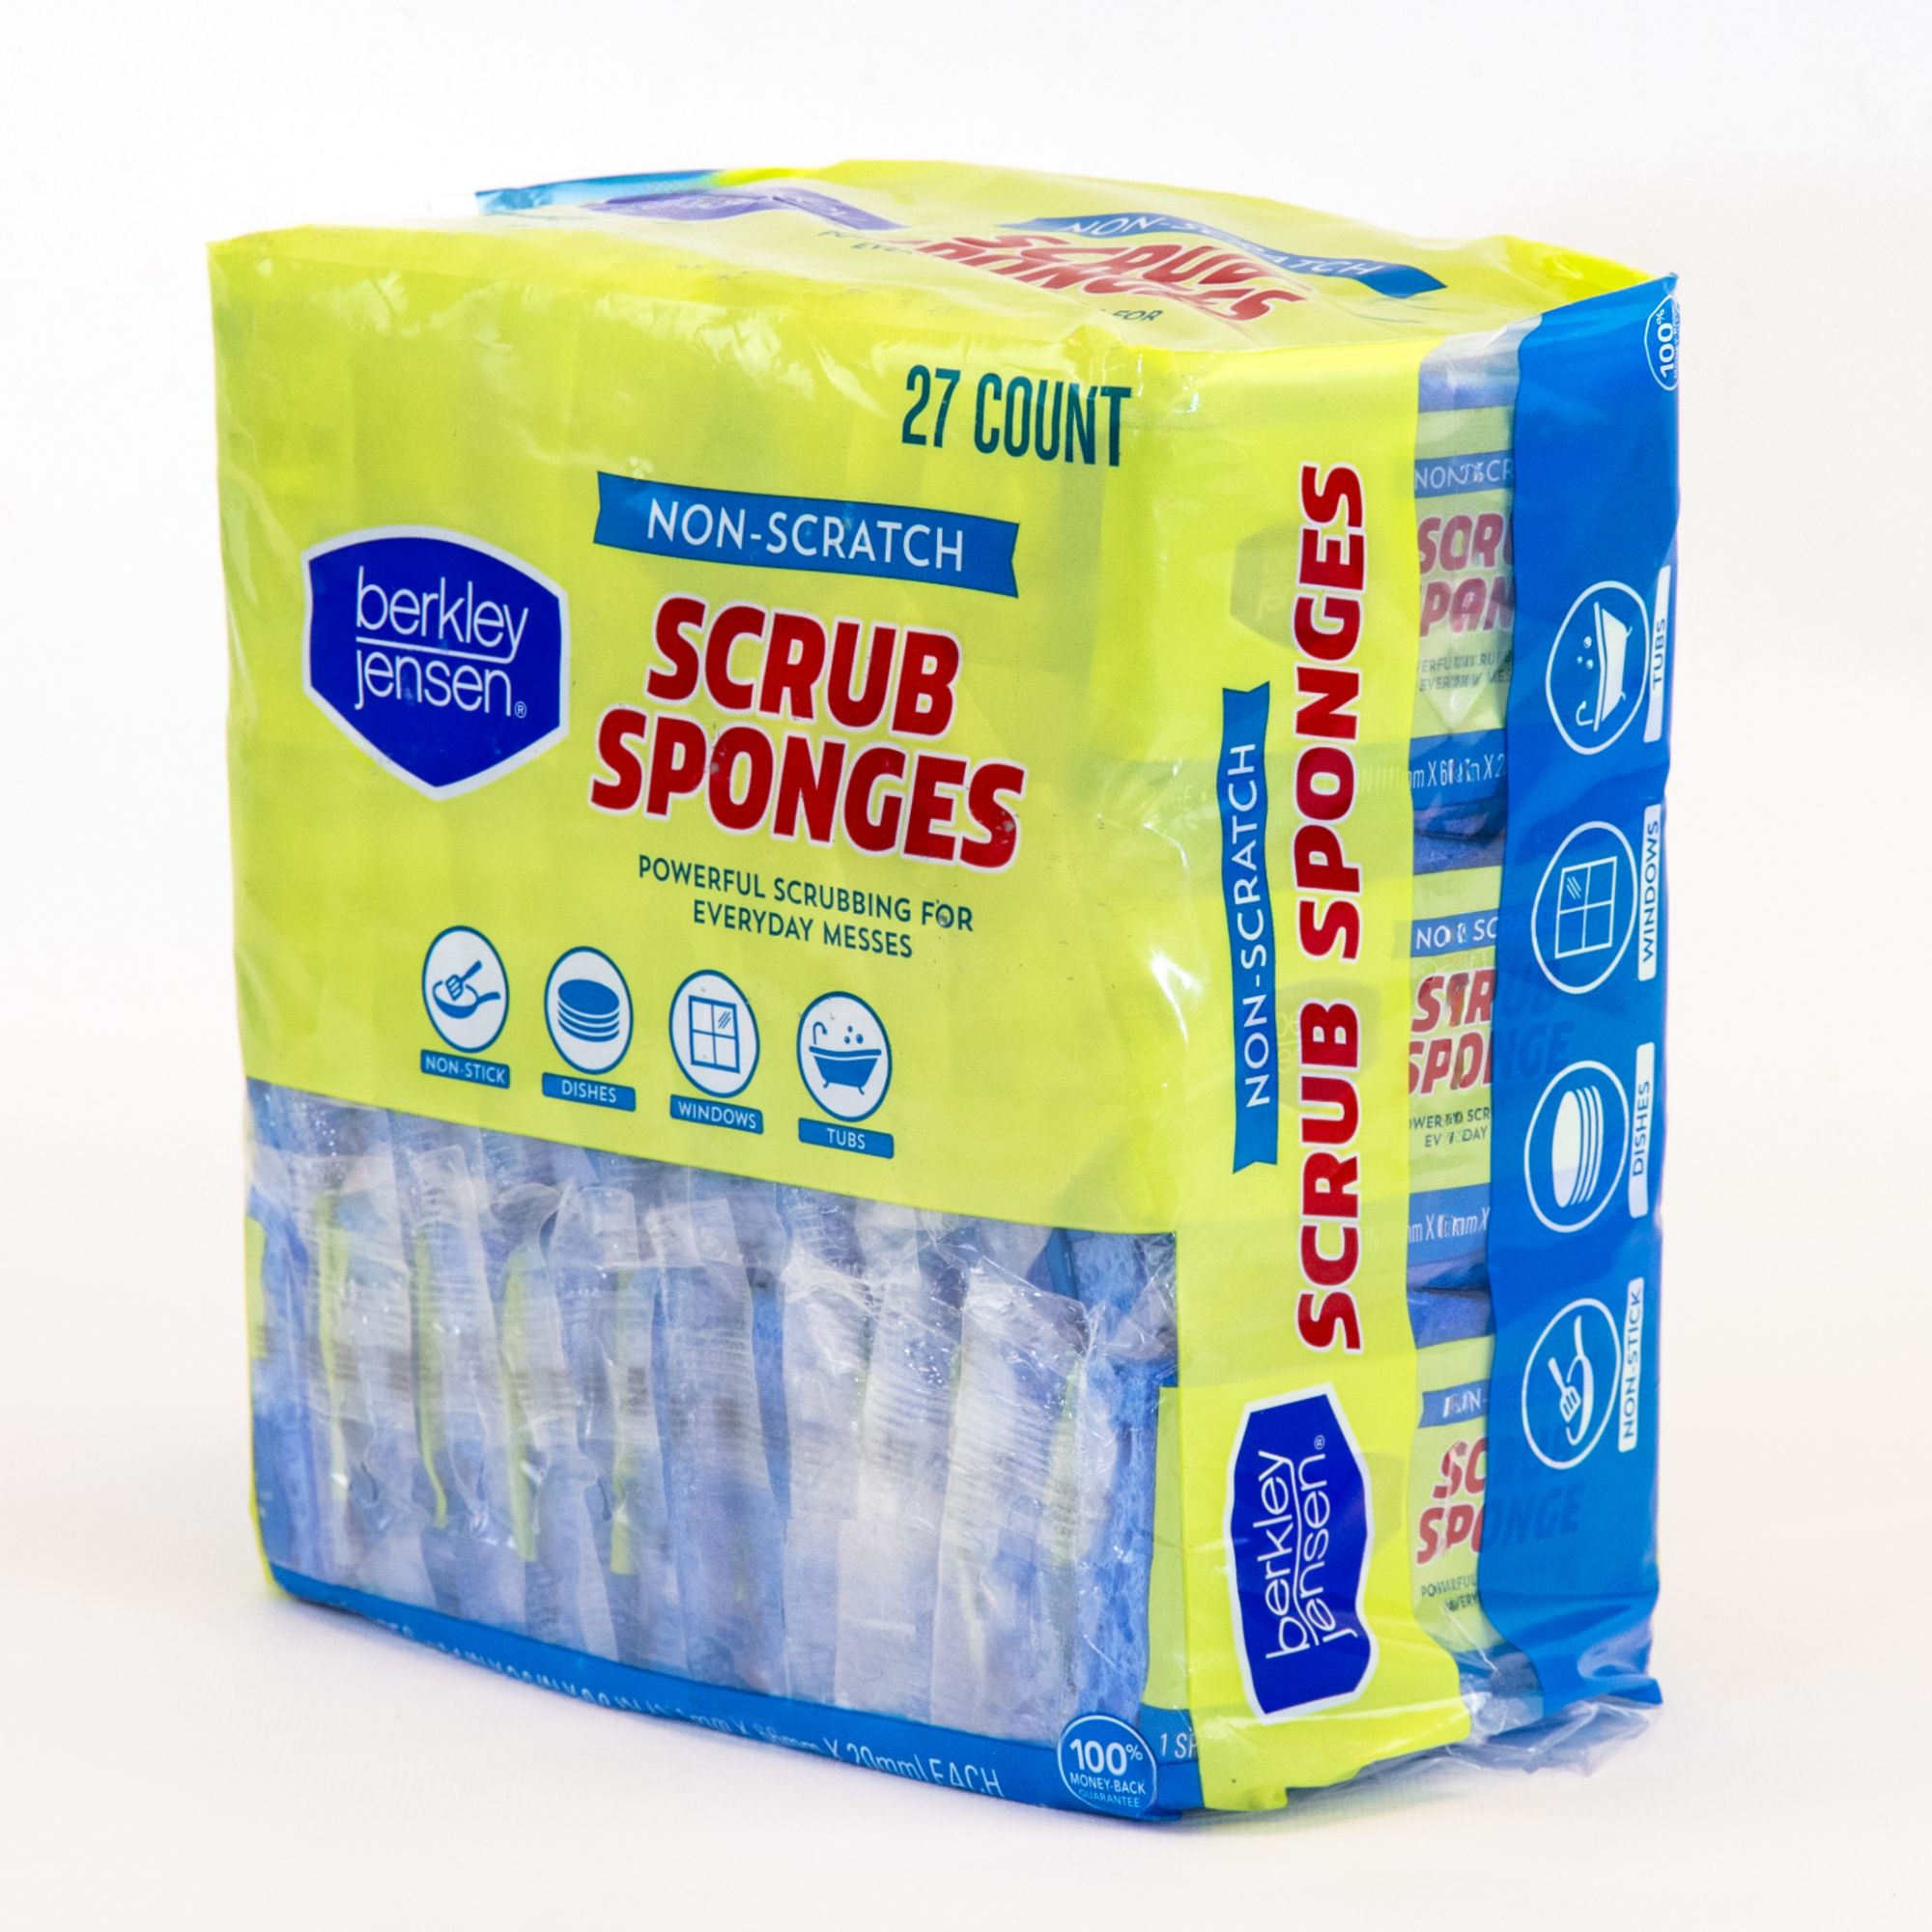 SCRUBIT Cellulose Scrub Sponge - Kitchen Cleaning Sponges for  Dishes,Pans,Pots & More- 6 Pack Dishwashing Sponges - Colors May Vary